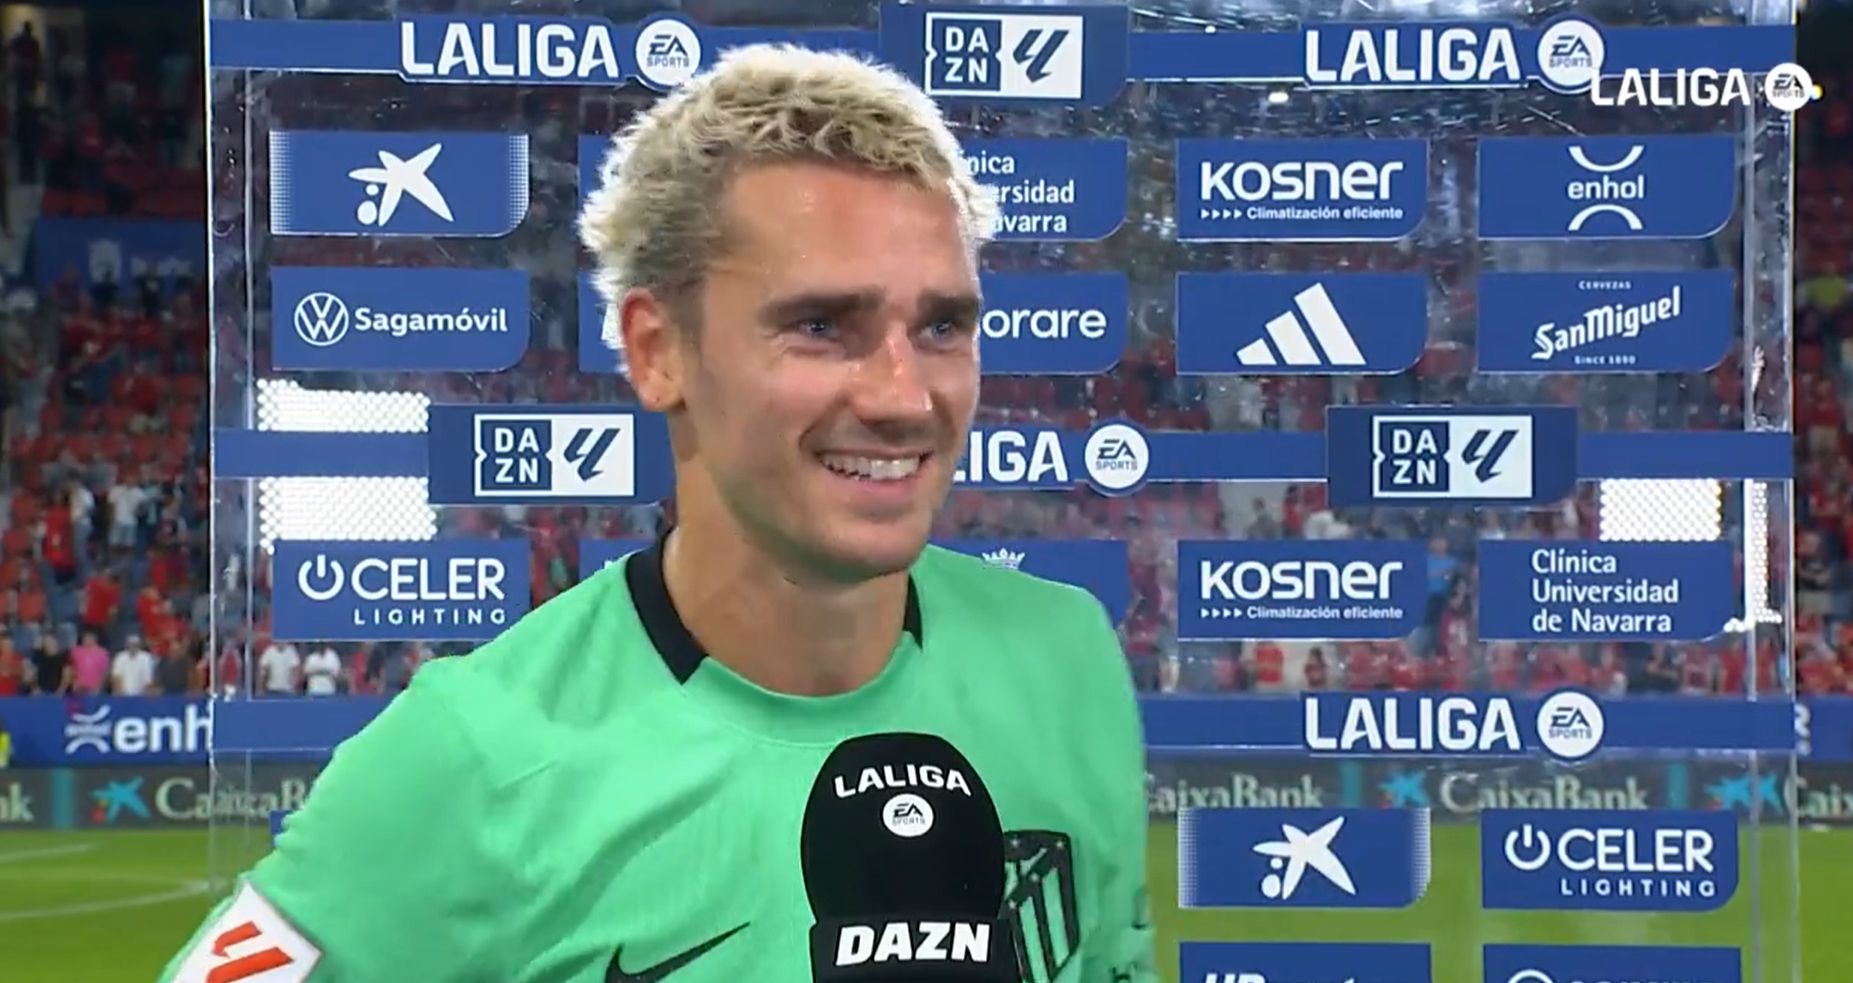 WATCH: Antoine Griezmann gives hilarious response as explanation for improved Atletico Madrid form